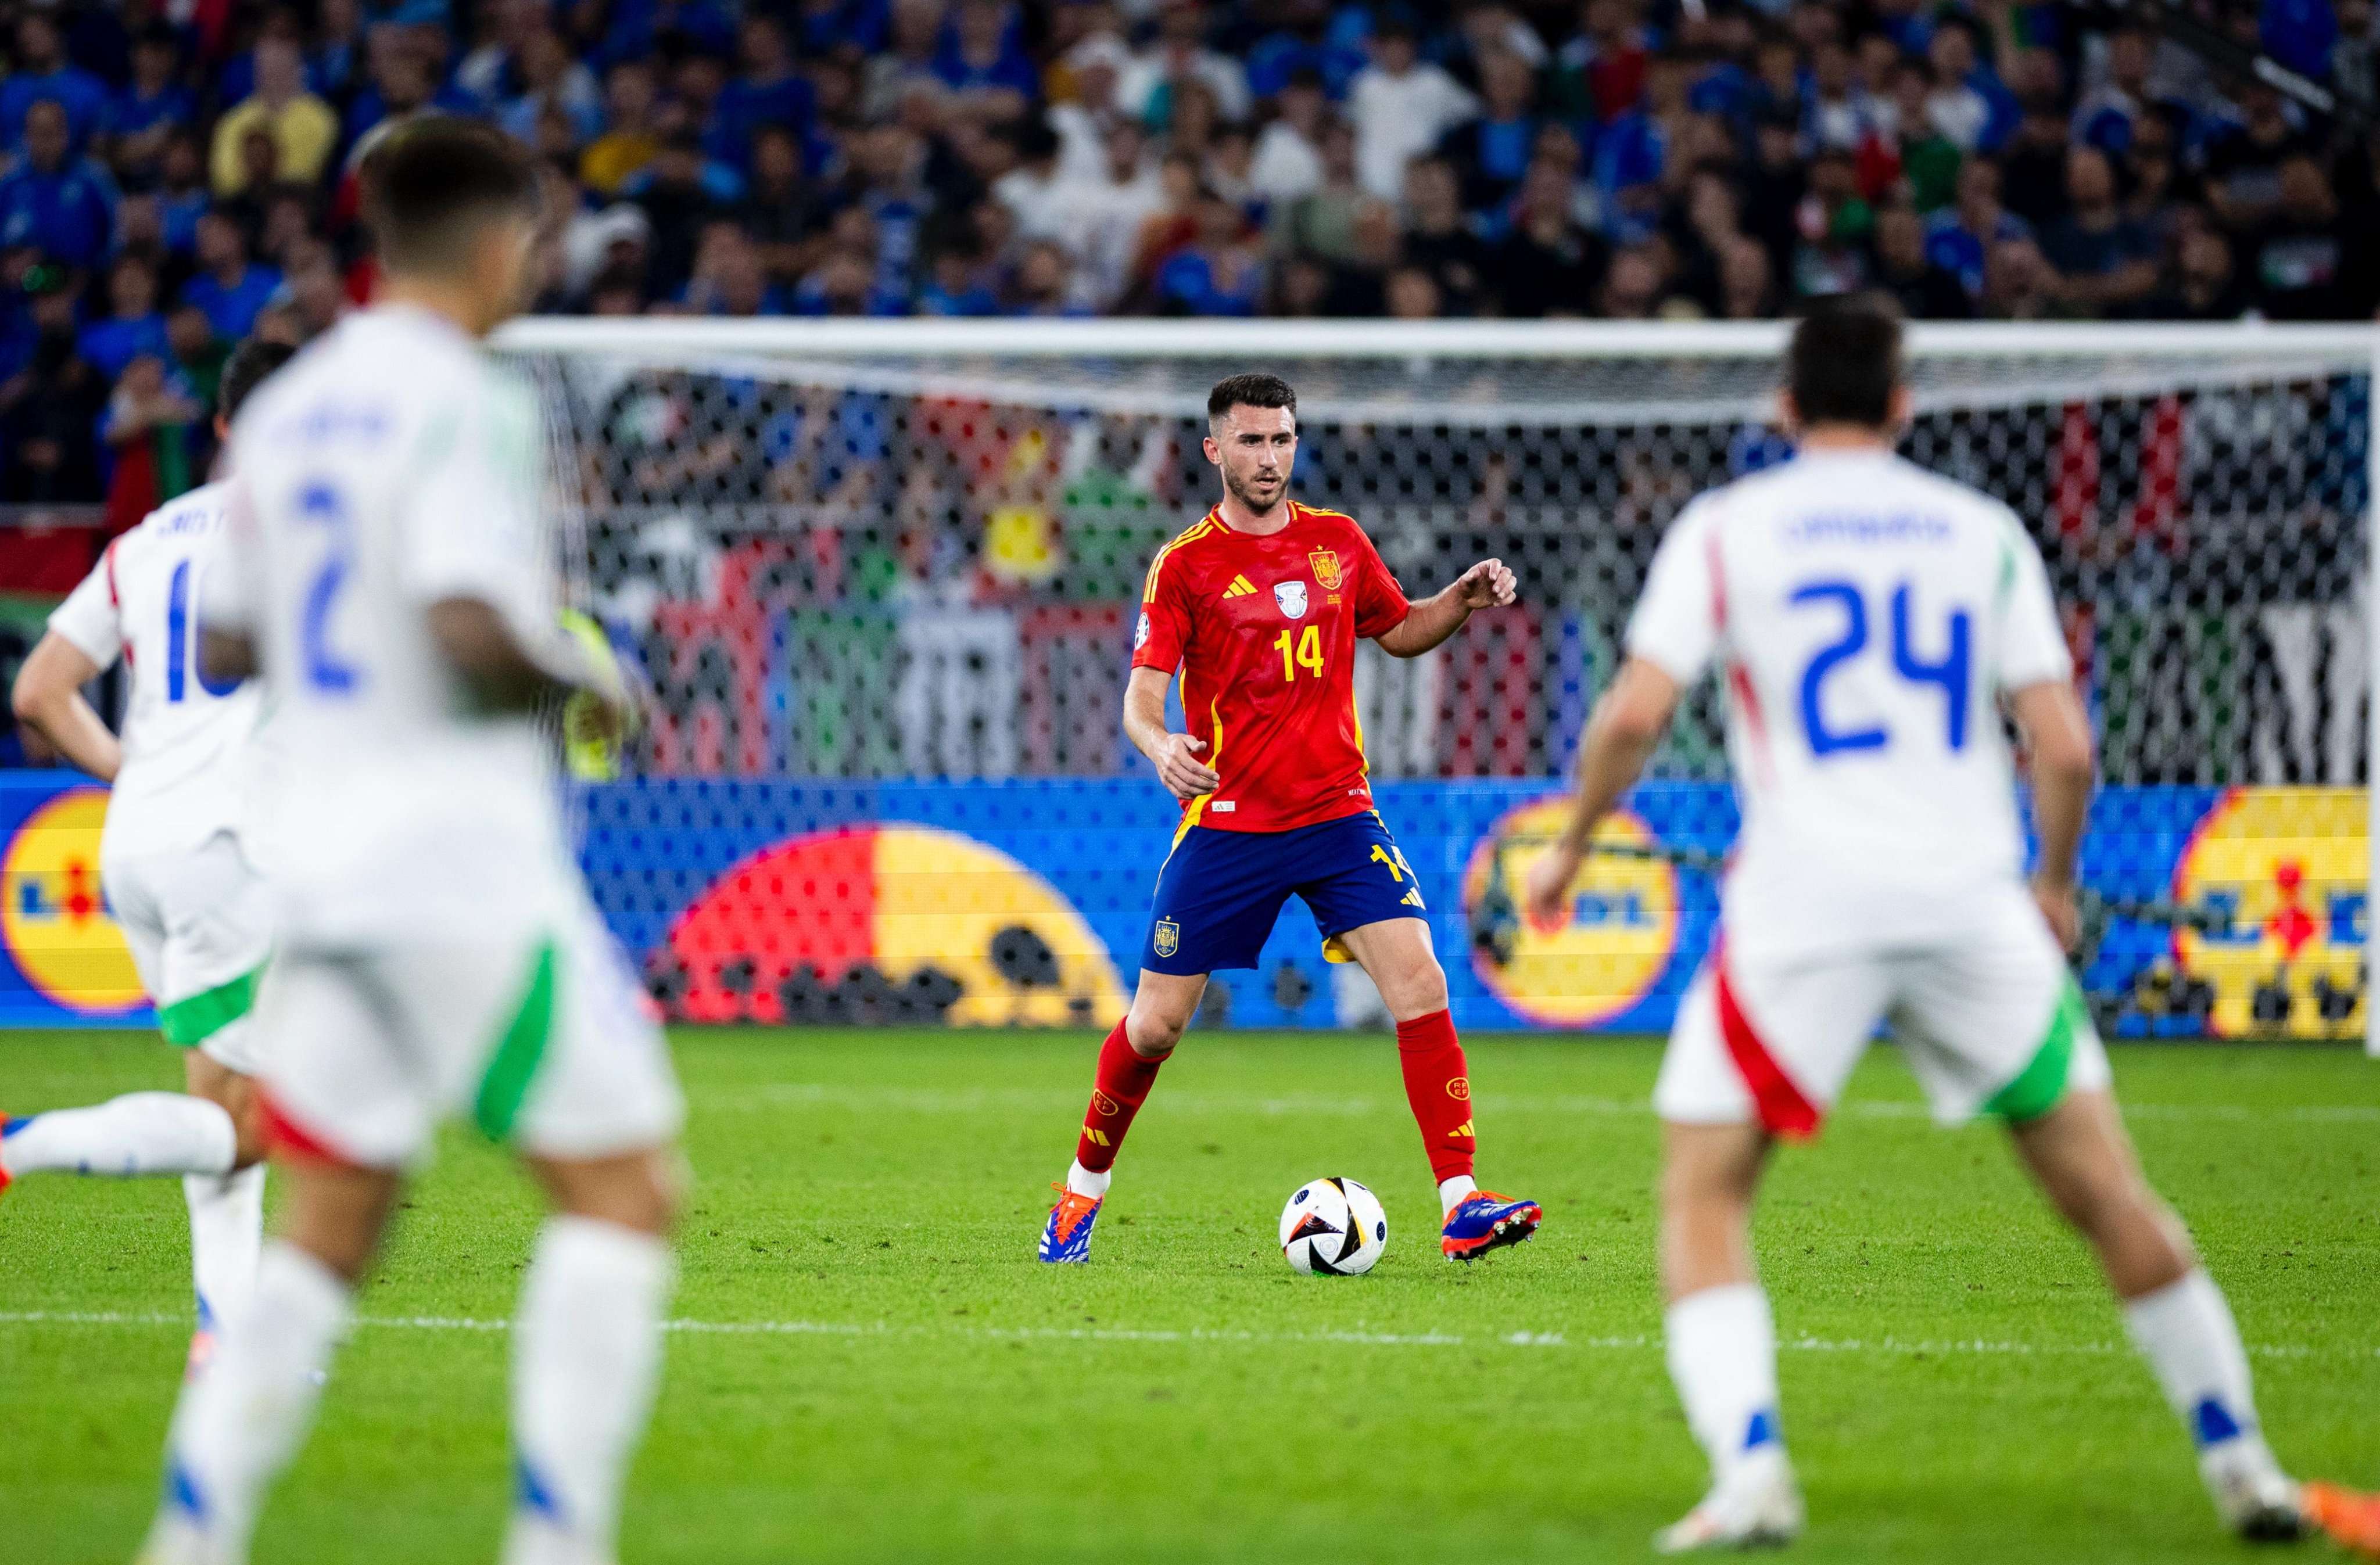 Spain qualify for knockout, wins against Italy